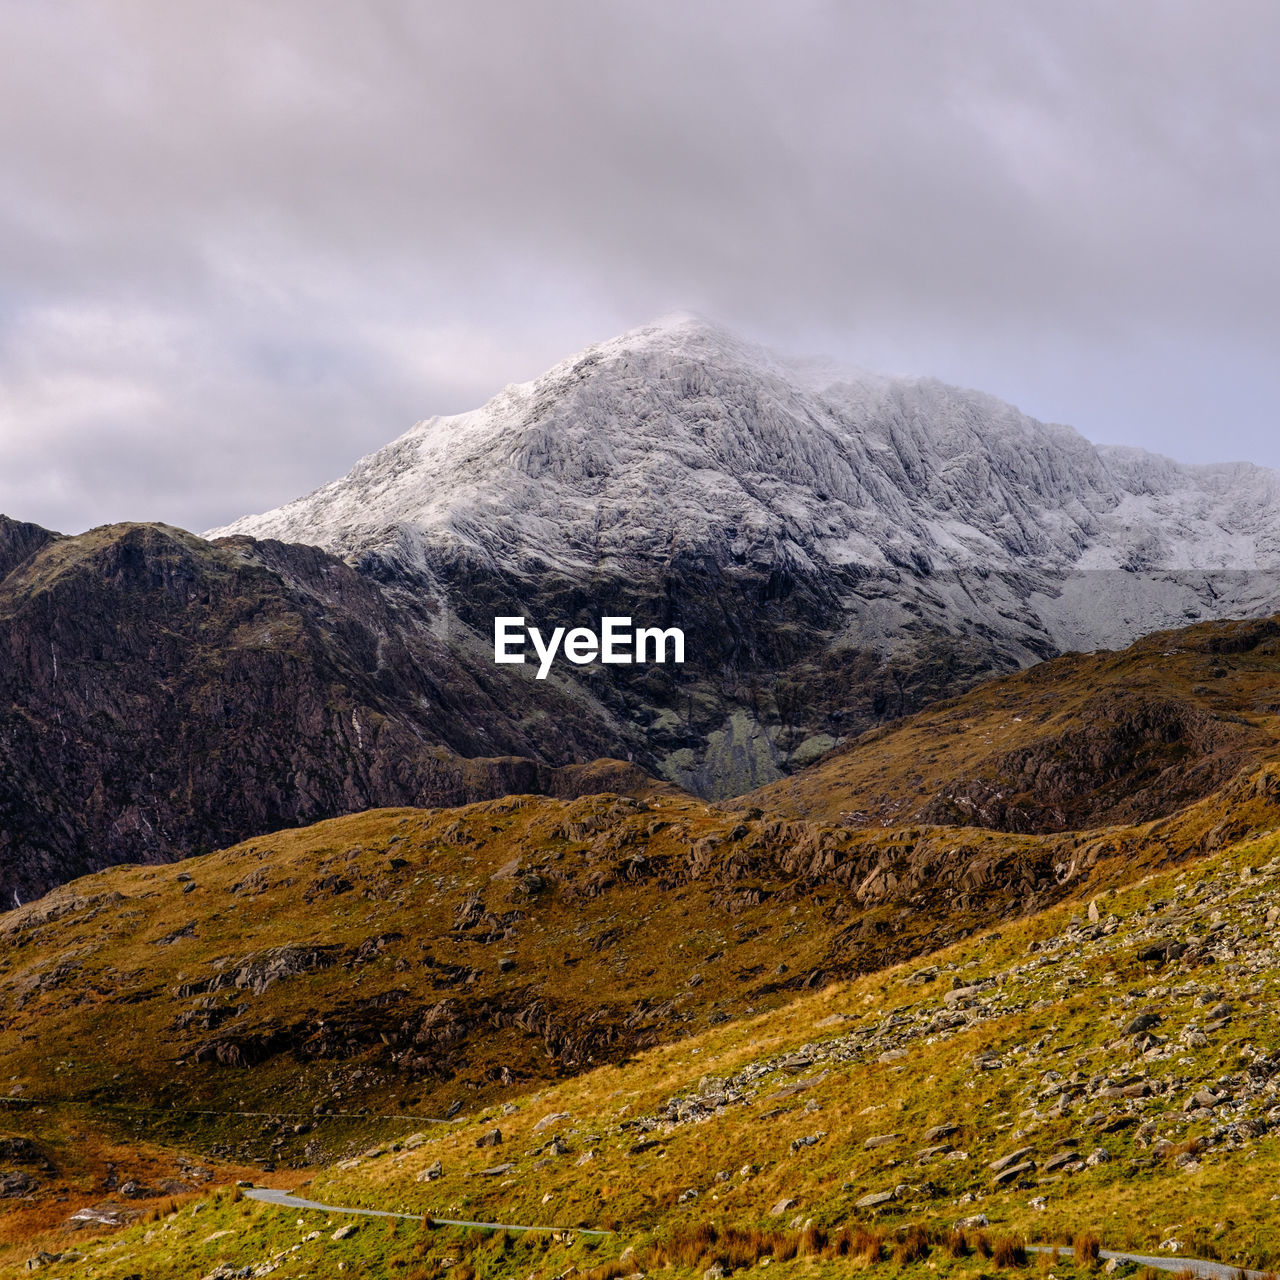 The snow covered summit of snowdon in snowdonia national park, north wales